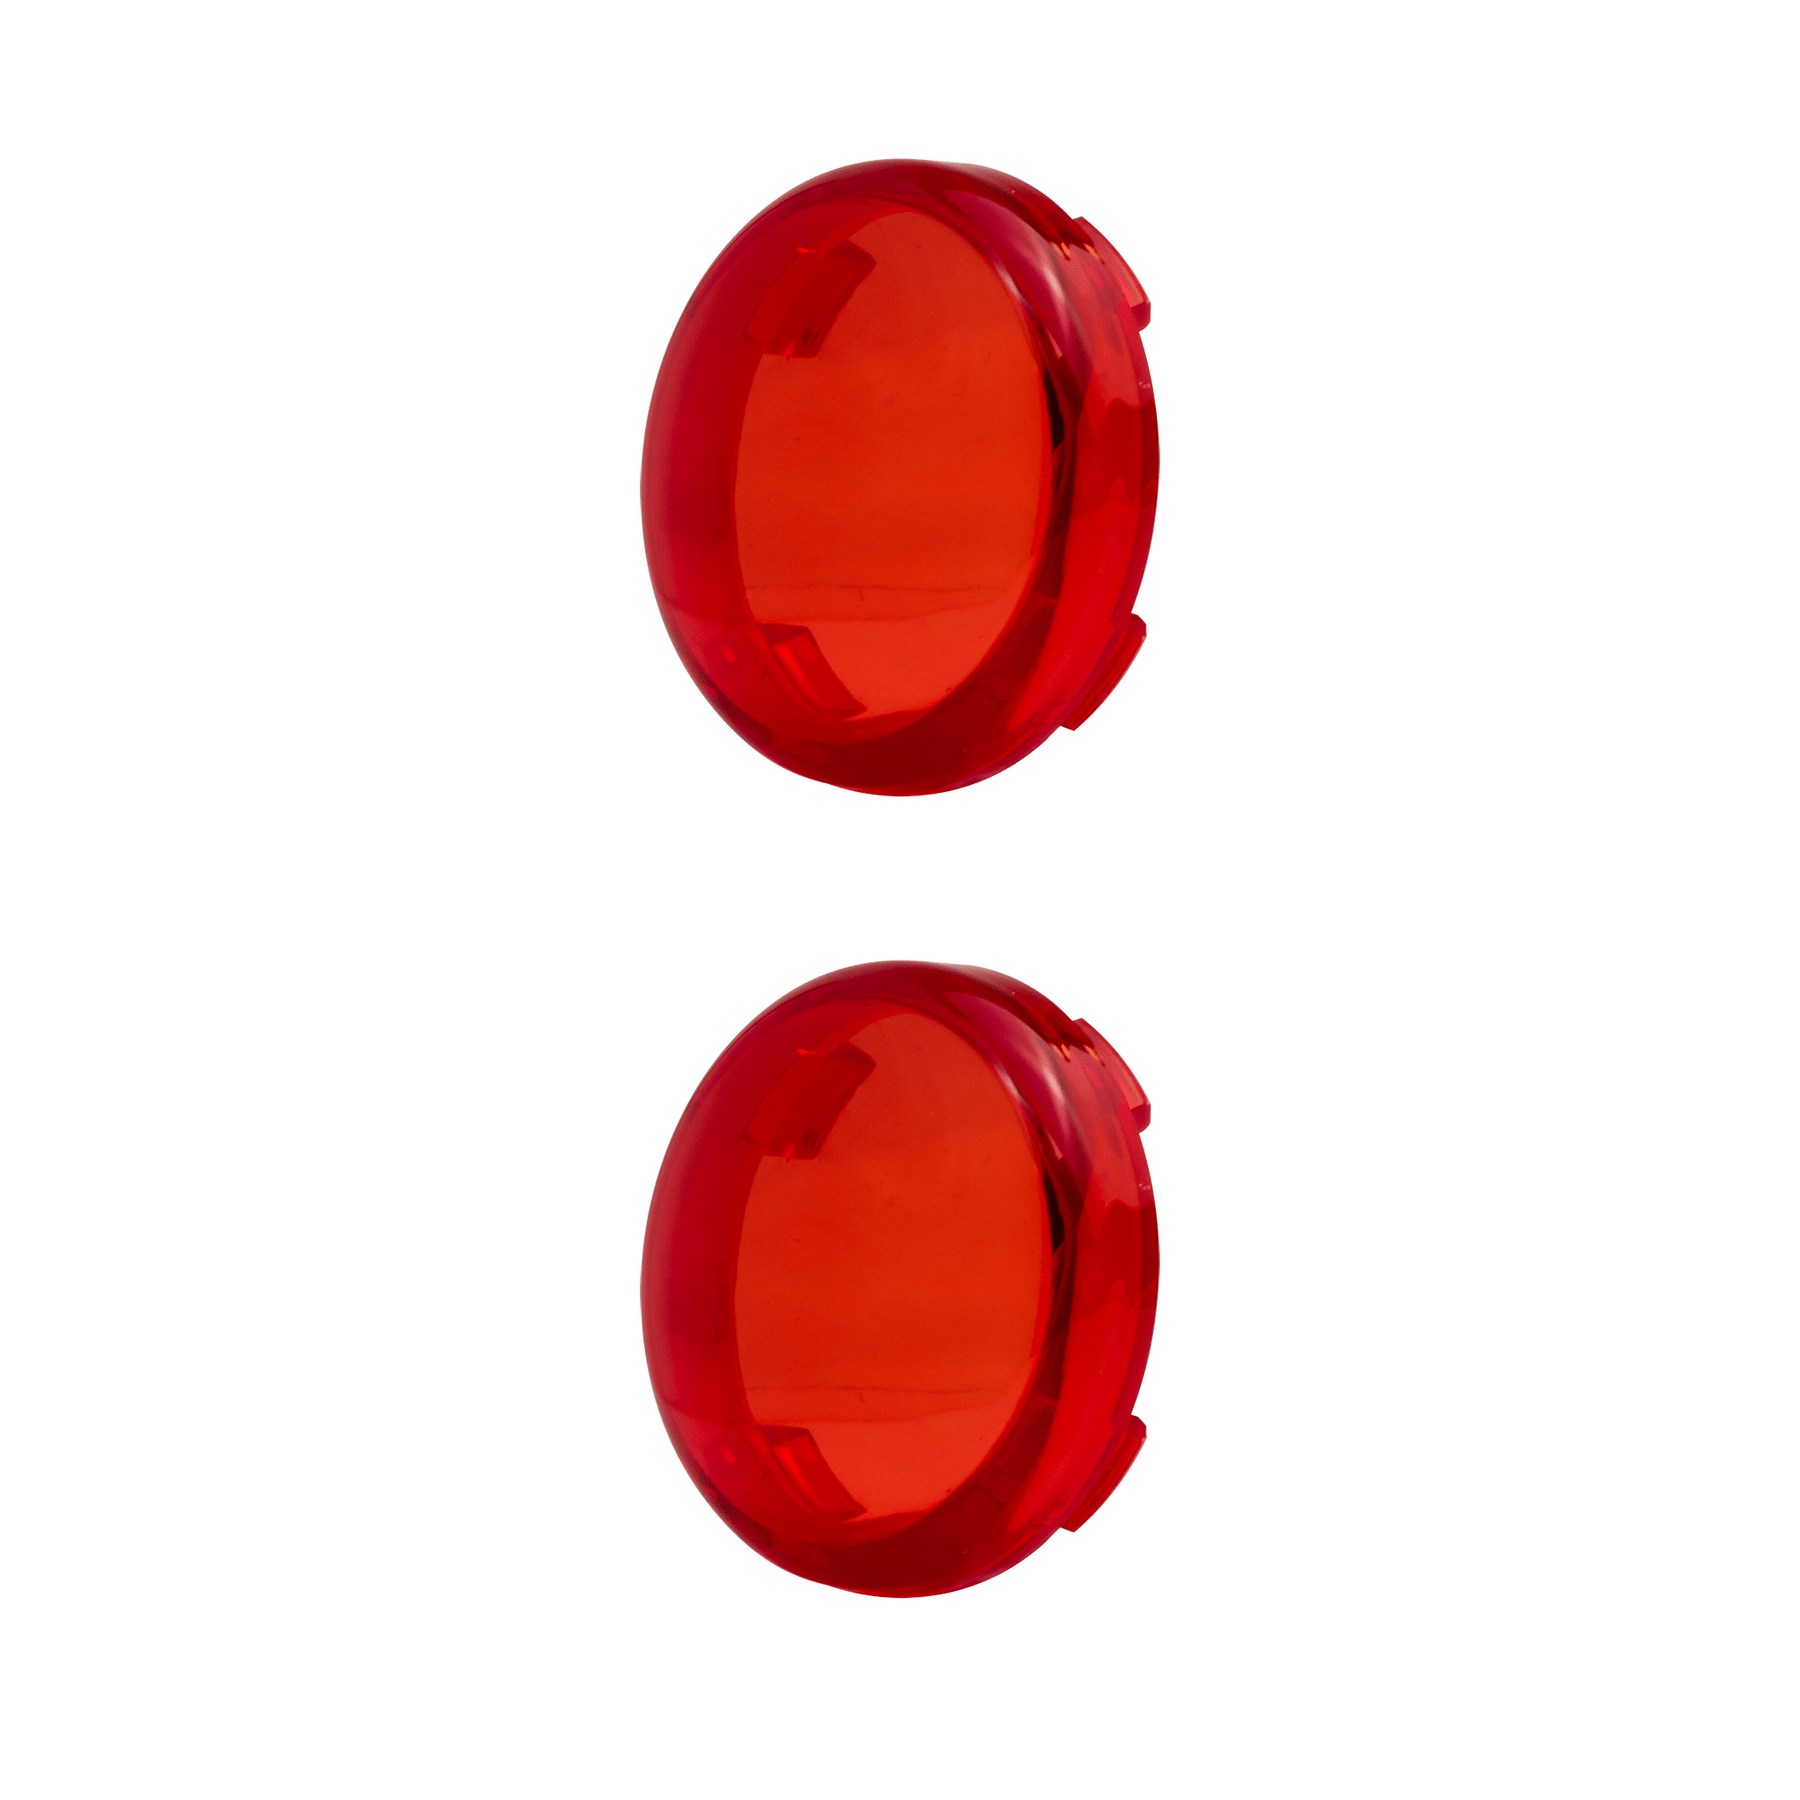 Eagle Lights Replacement Lenses for 2" Bullet Style Turn Signals Clear / Smoked / Amber